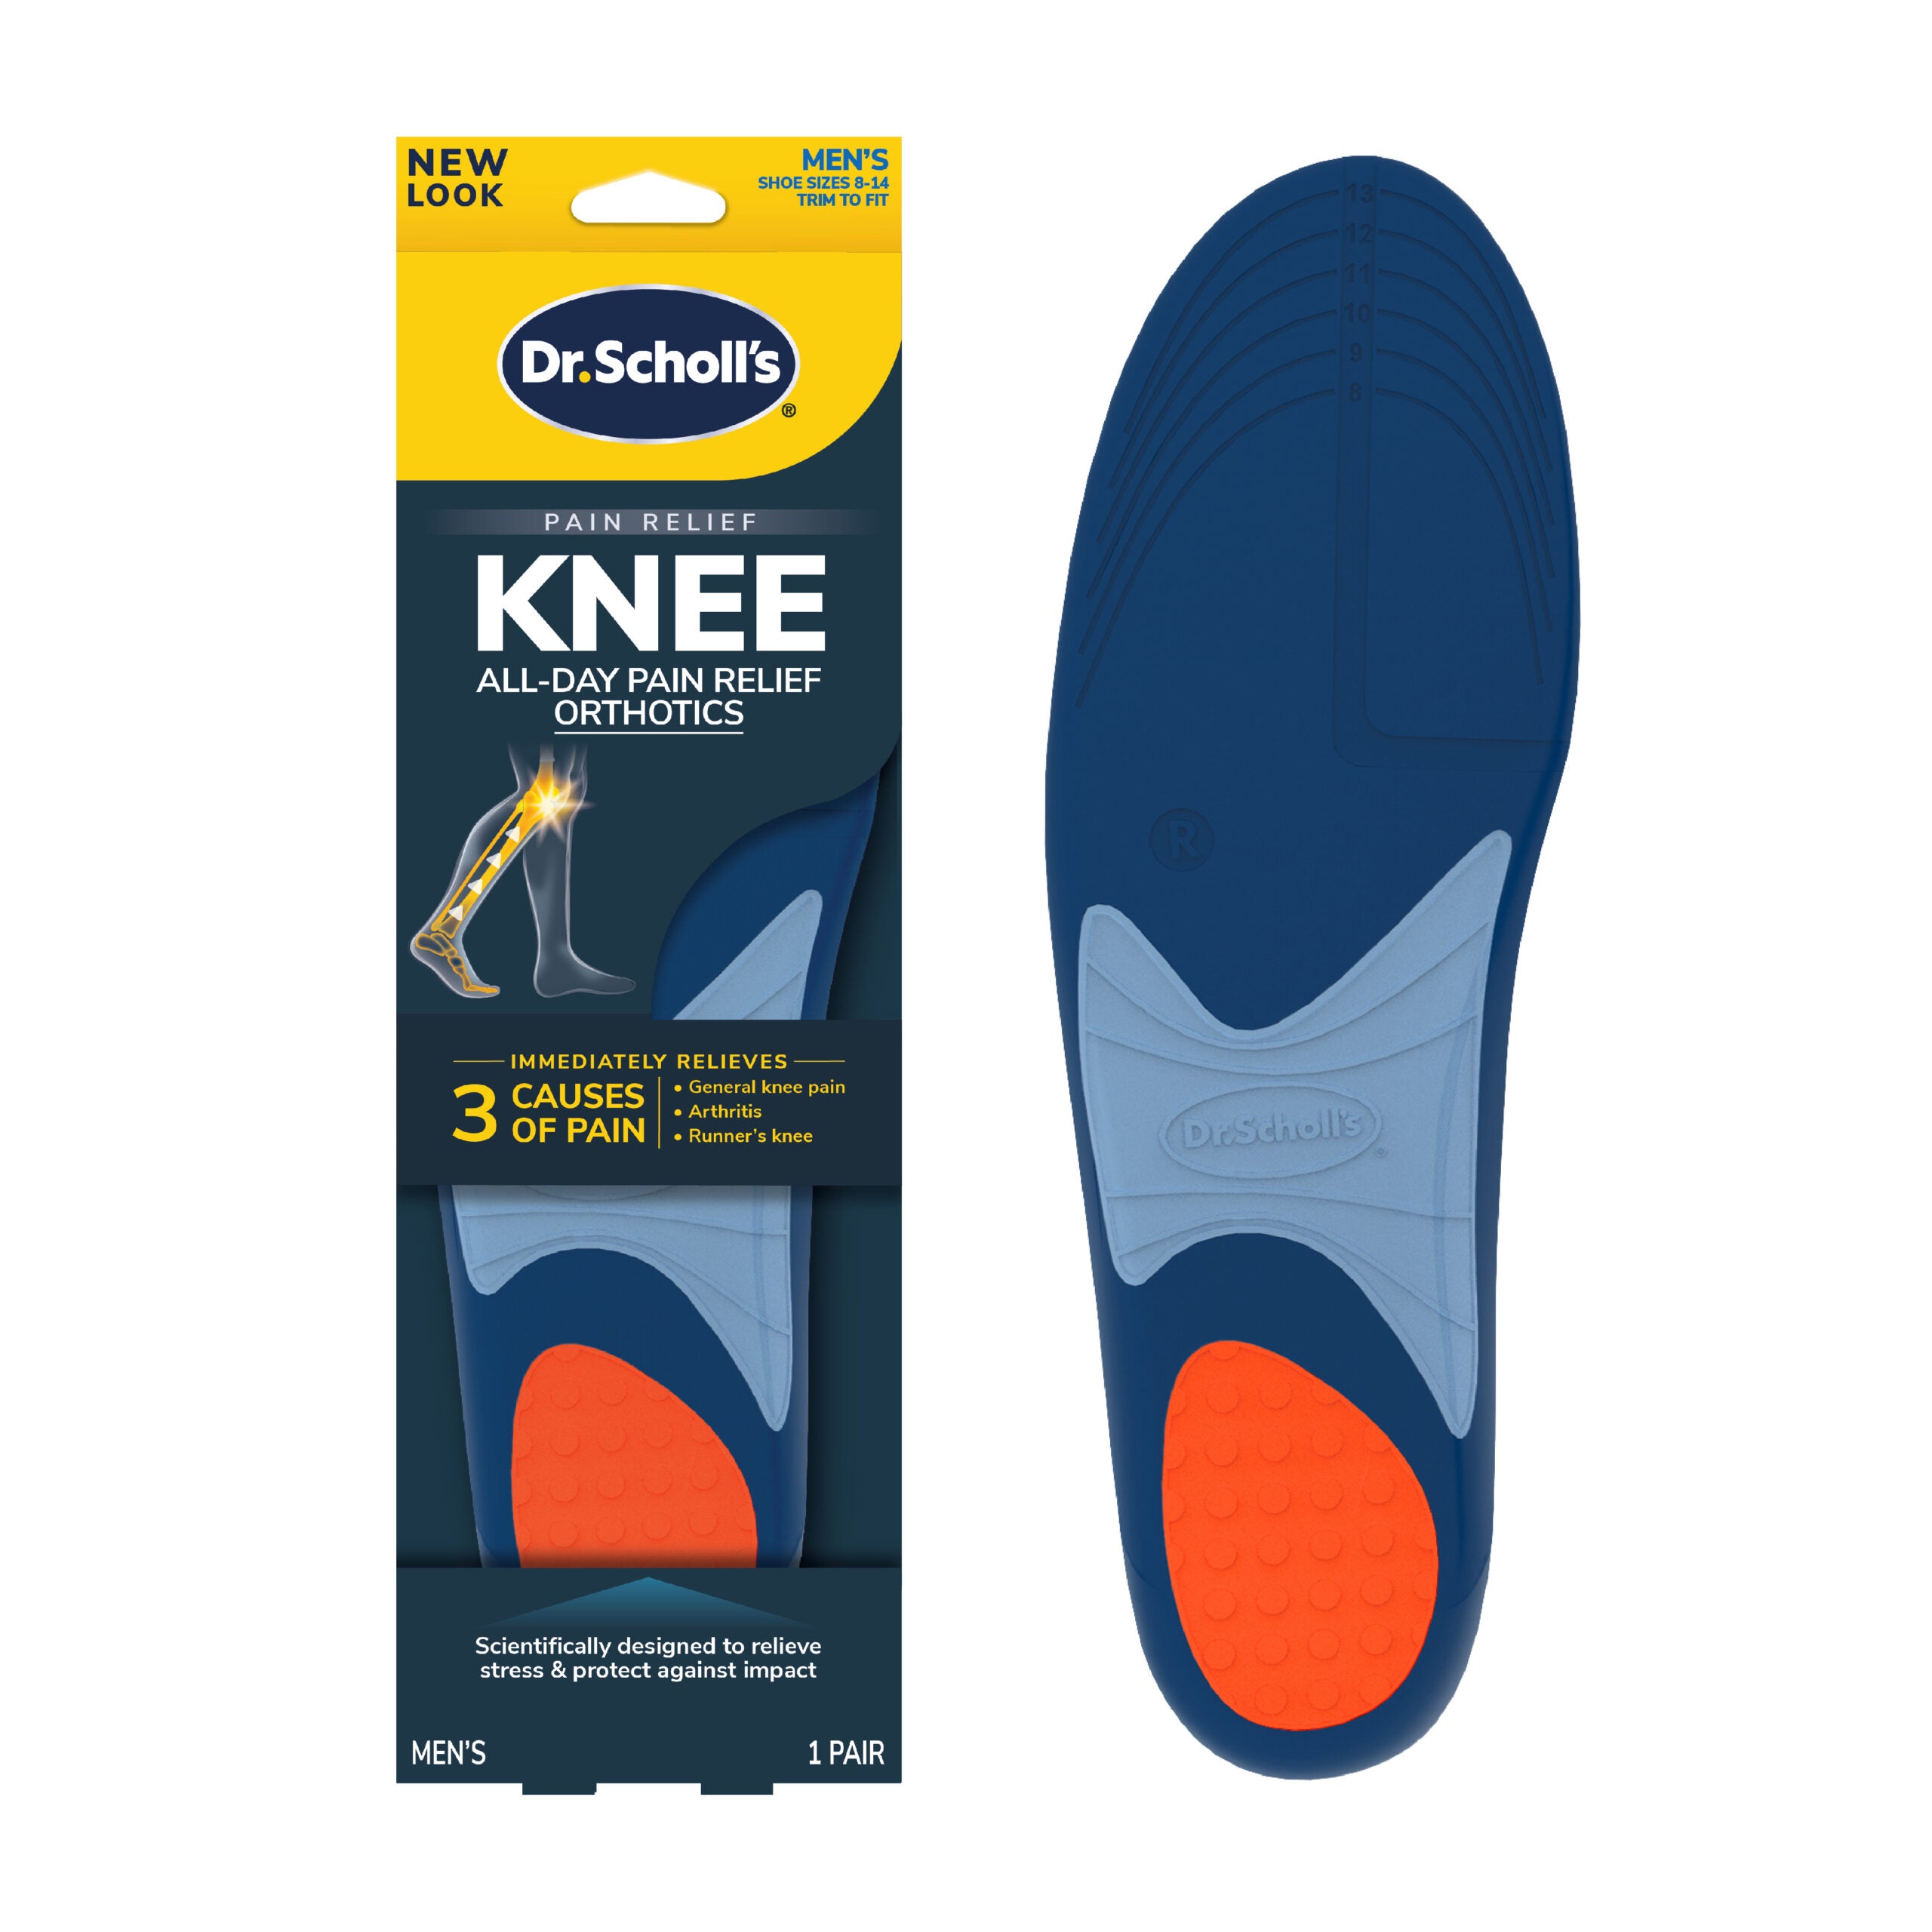 Knee All-Day Pain Relief Orthotics – DrScholls